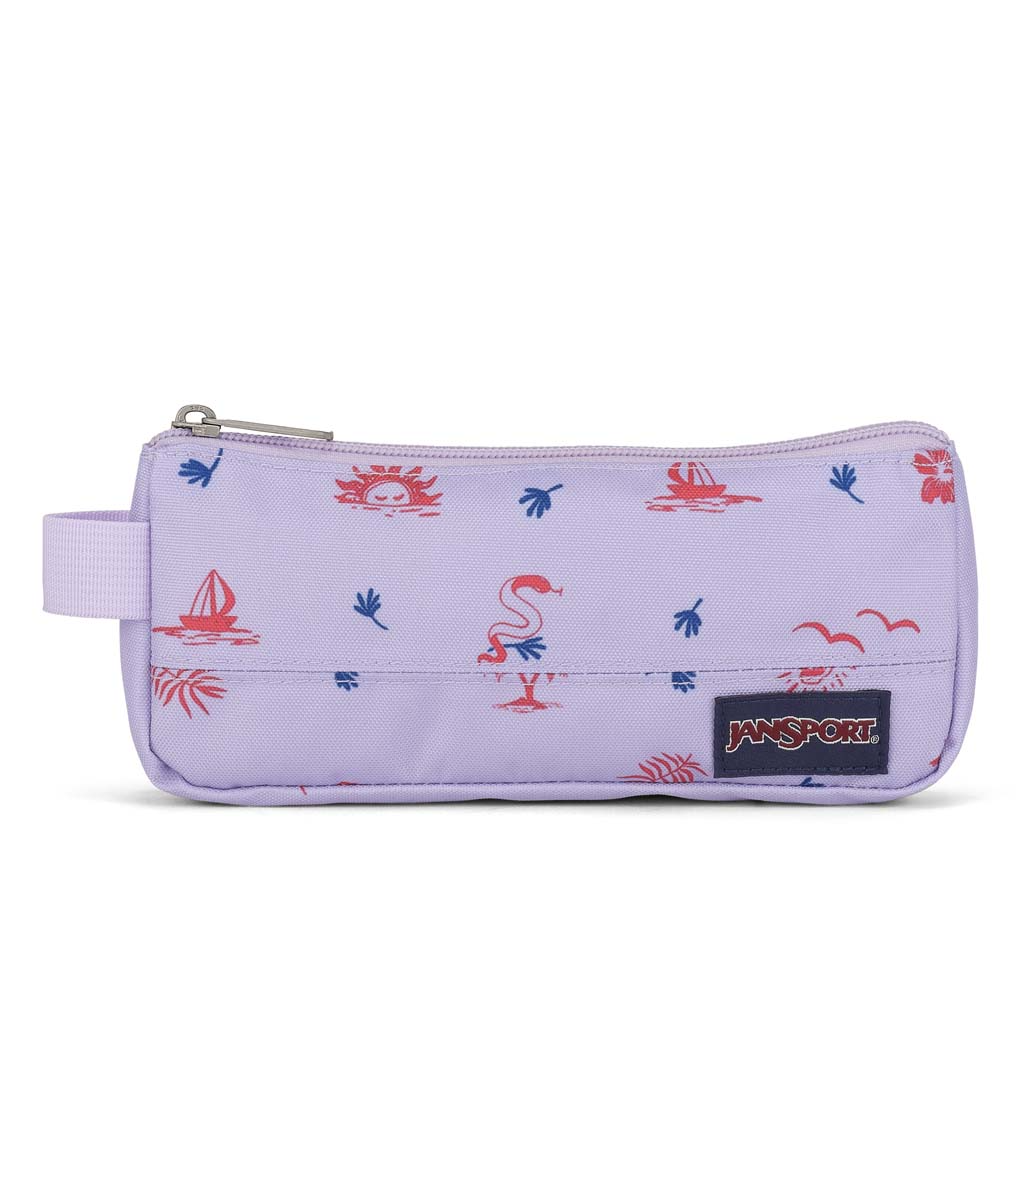 Basic Accessory Pouch